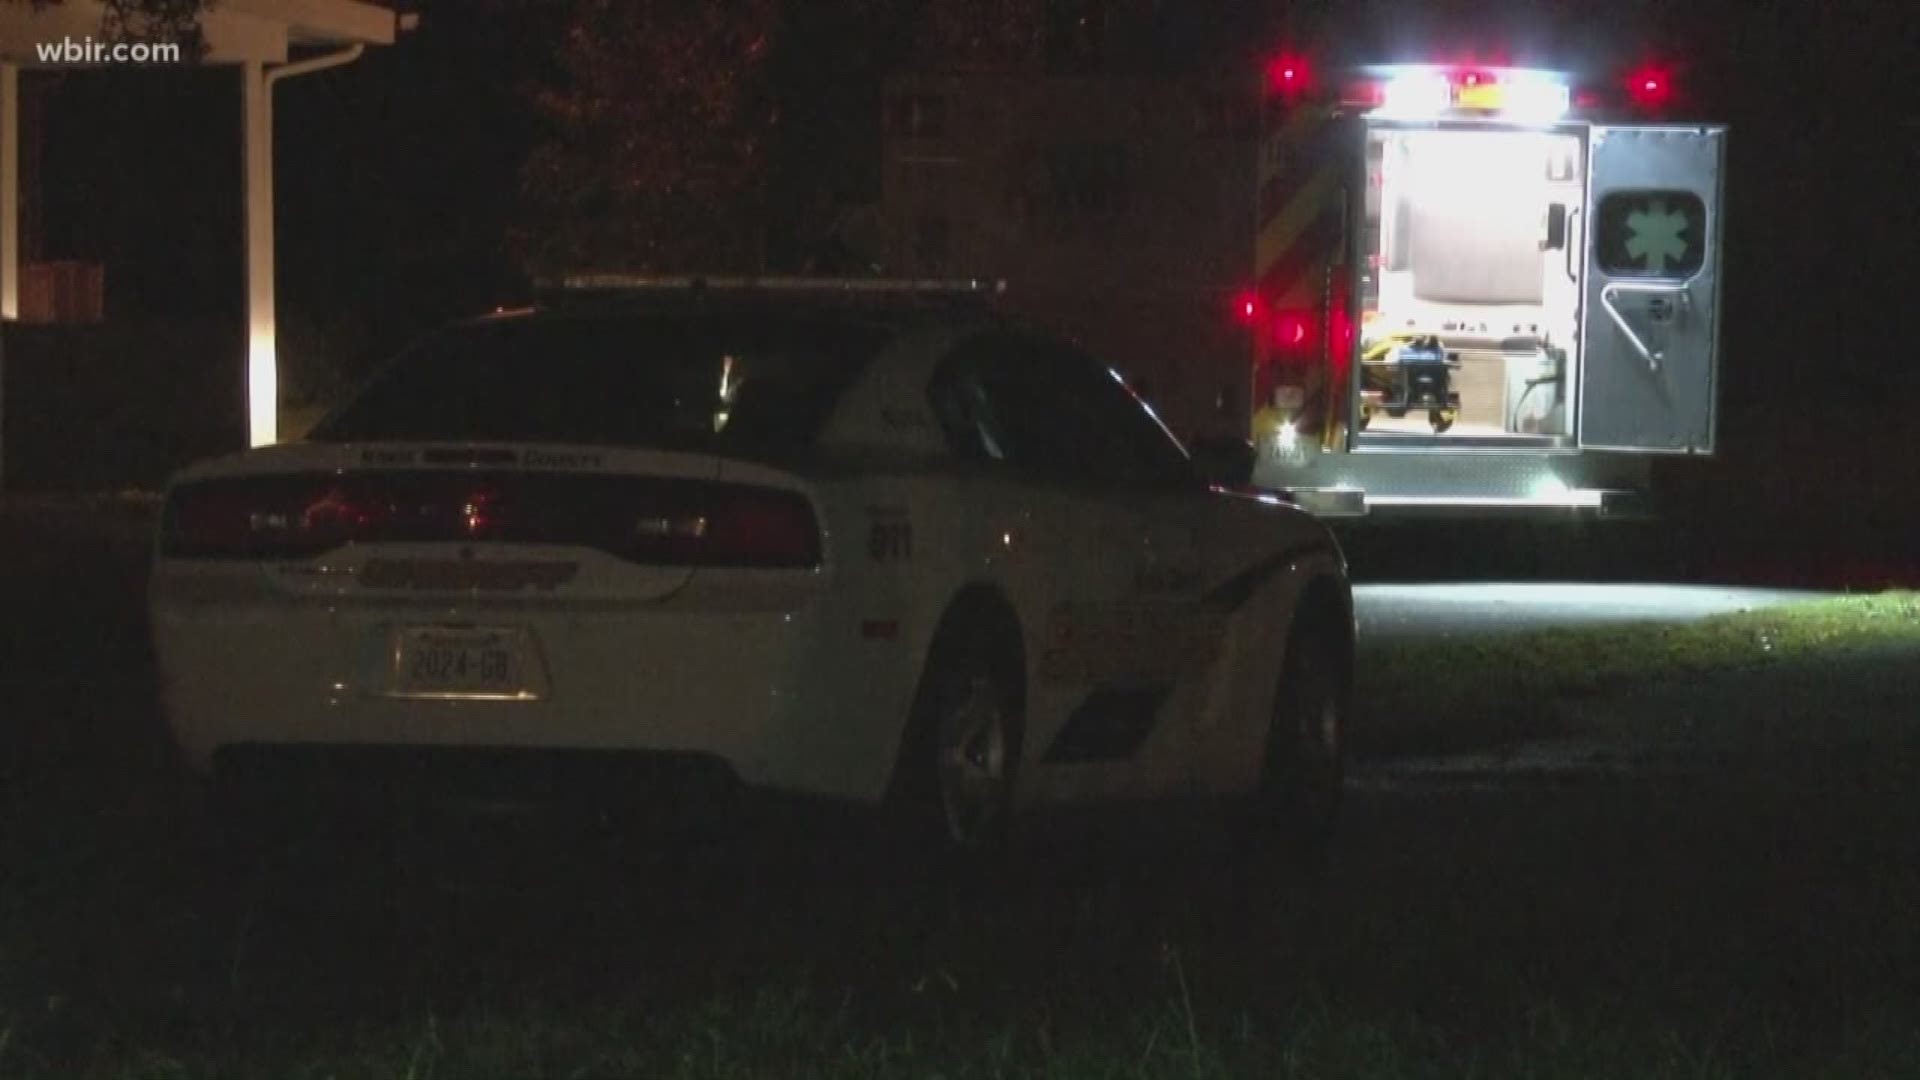 The Knox County Sheriff's Department says deputies are investigating an apparent murder-suicide in Farragut tonight.